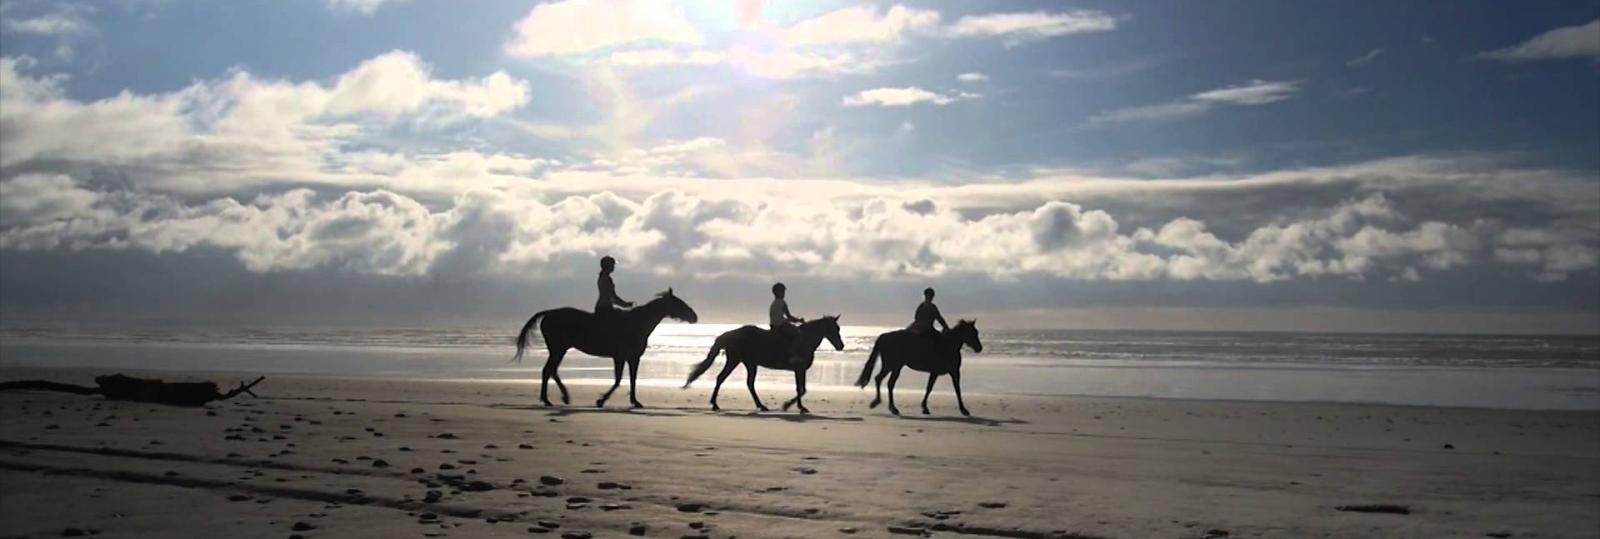 Three large horse's galloping down a West Coast beach at sunset.